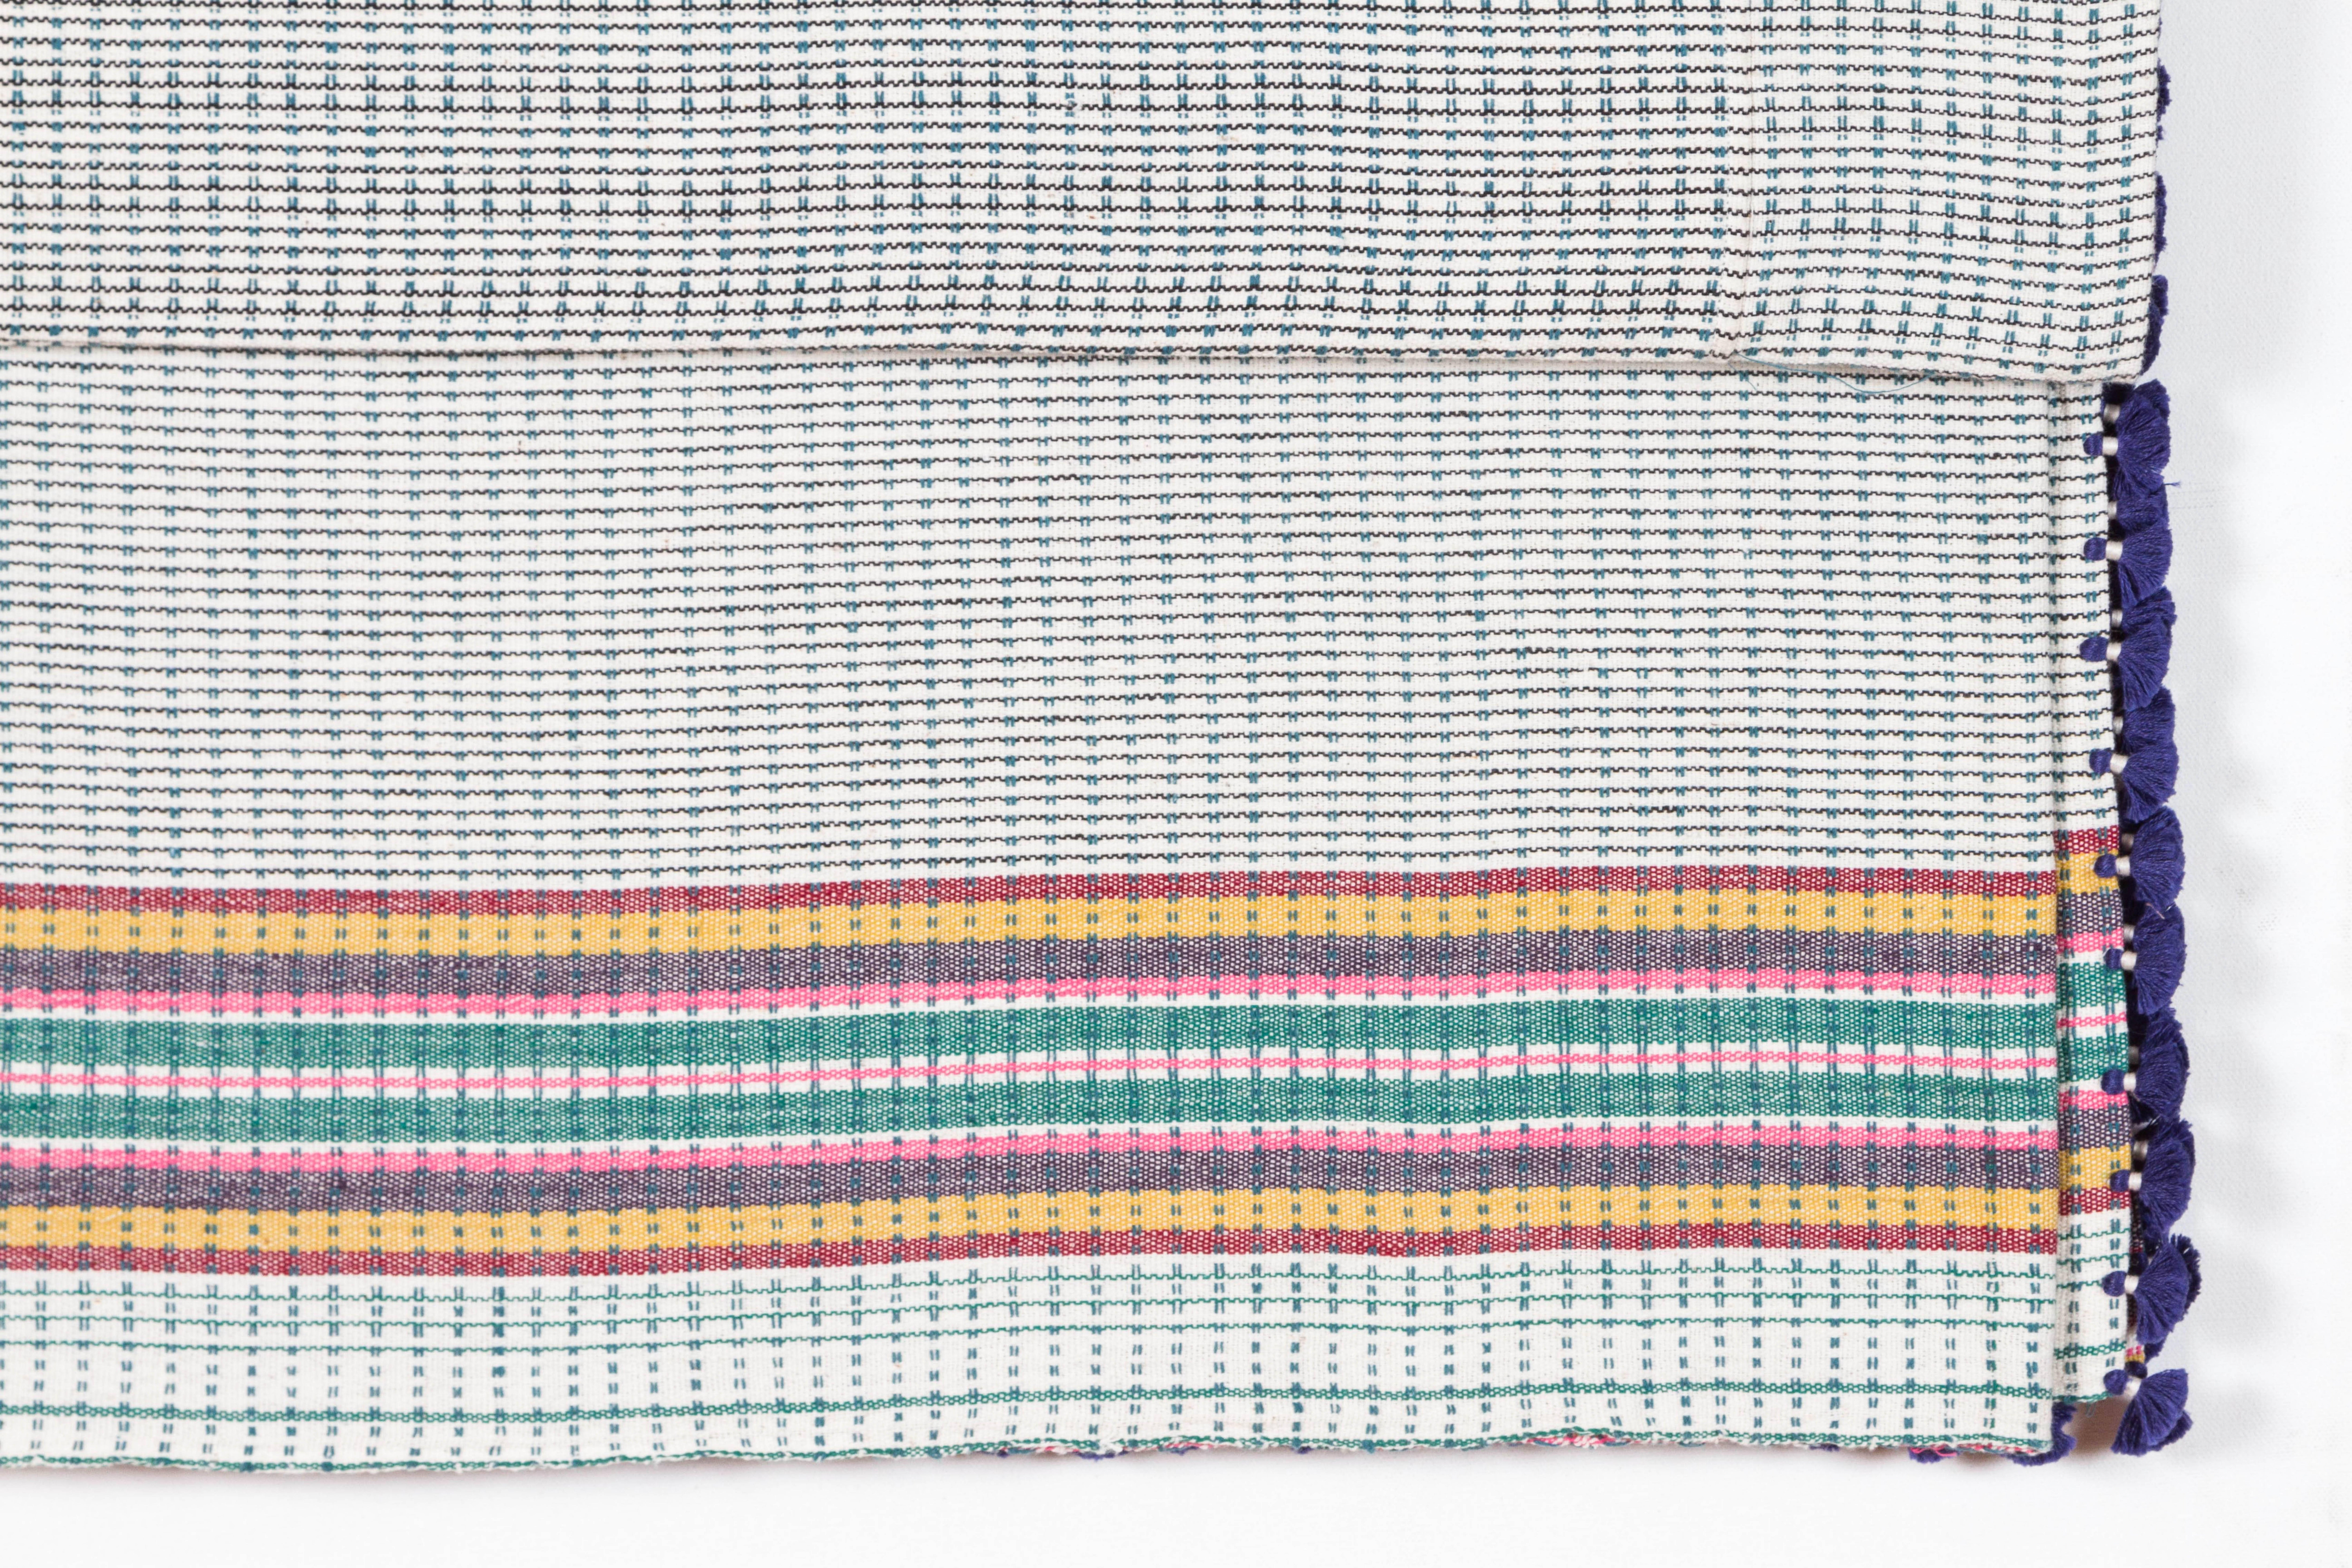 Kala naturally dyed organic cotton from Gujarat, India.  Hand loomed using traditional Indian textile techniques to produce extra weft woven stripes and plaids.  This multicolor bedcover has added hand-knotted royal blue tassels.